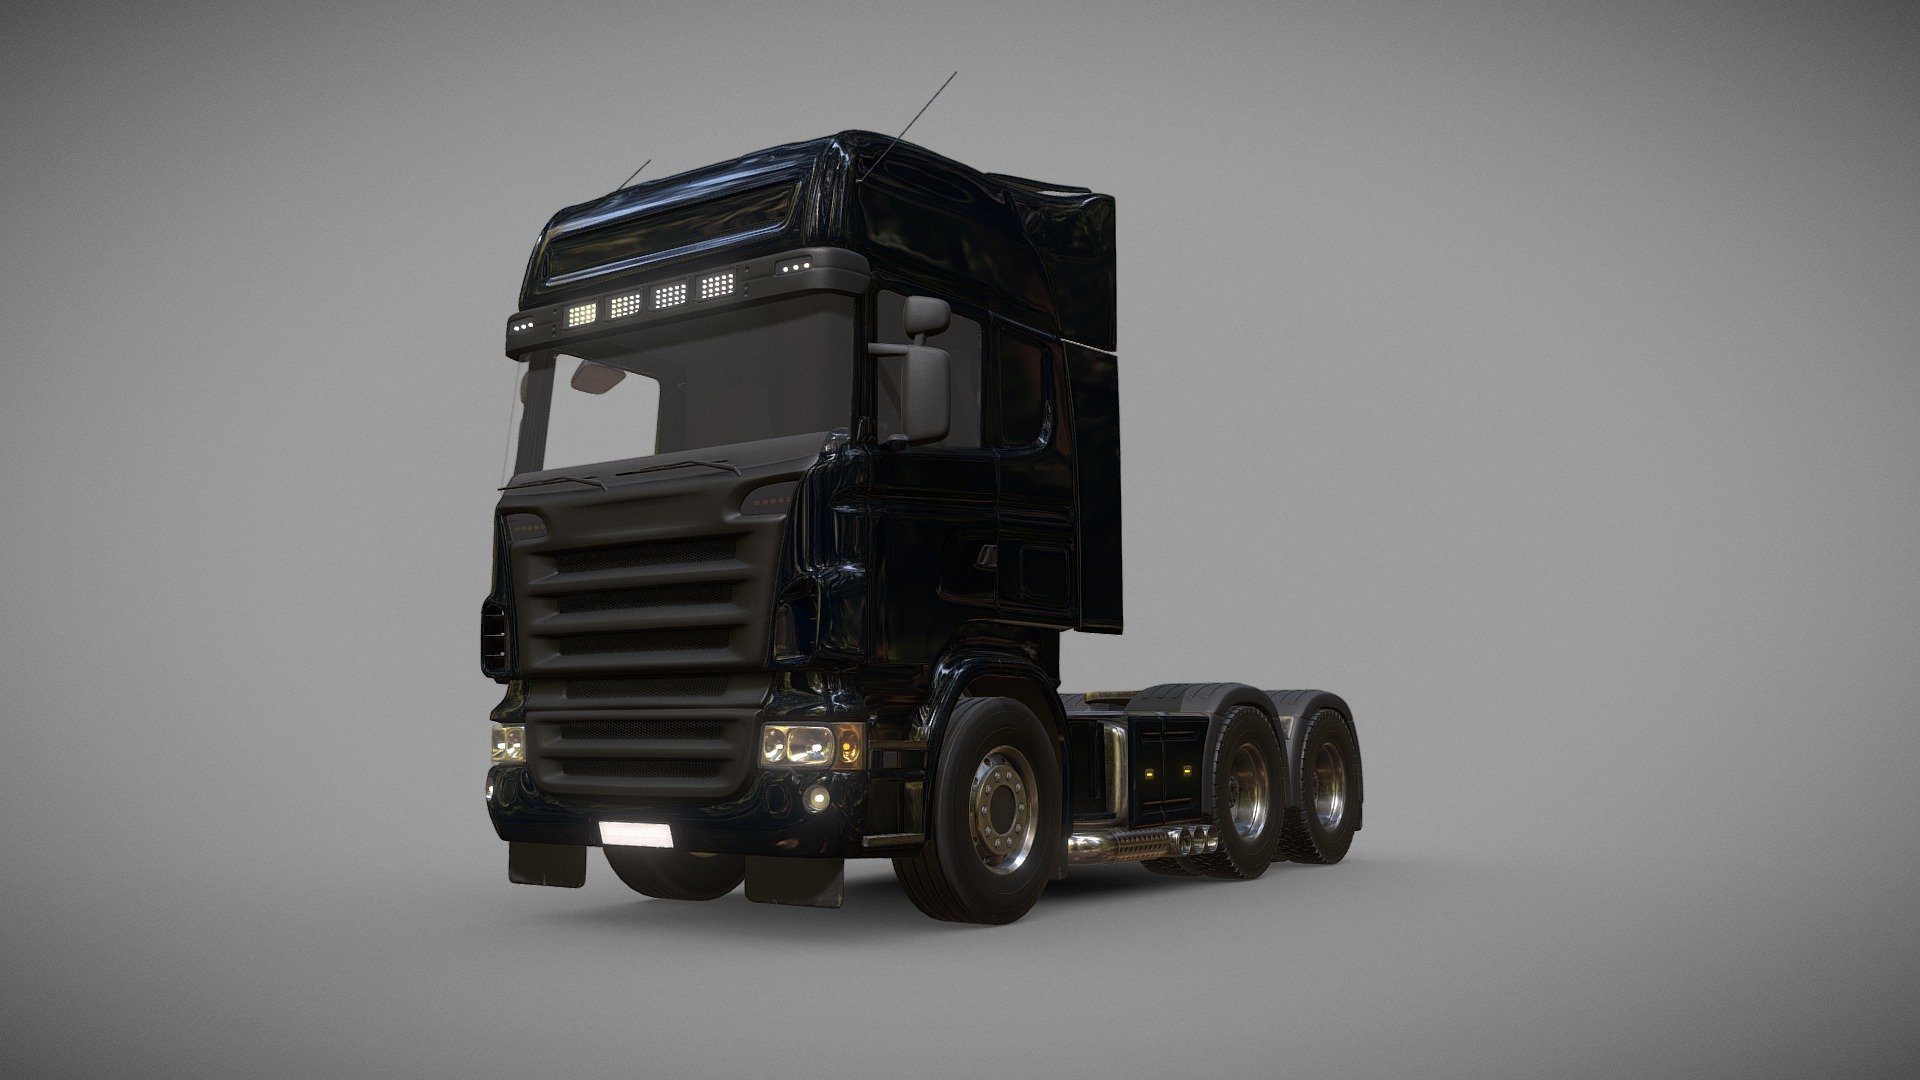 This is the truck of my truck rig for cinema 4d. 
1 subdivision step. 

You will finde it here:
https://www.danielweinlein.com/truck-rig

If you have any questions, please contact: d.wstudios@hotmail.de - TRUCK Model (Scania based) - 3D model by DANIEL WEINLEIN (@danielweinlein) 3d model